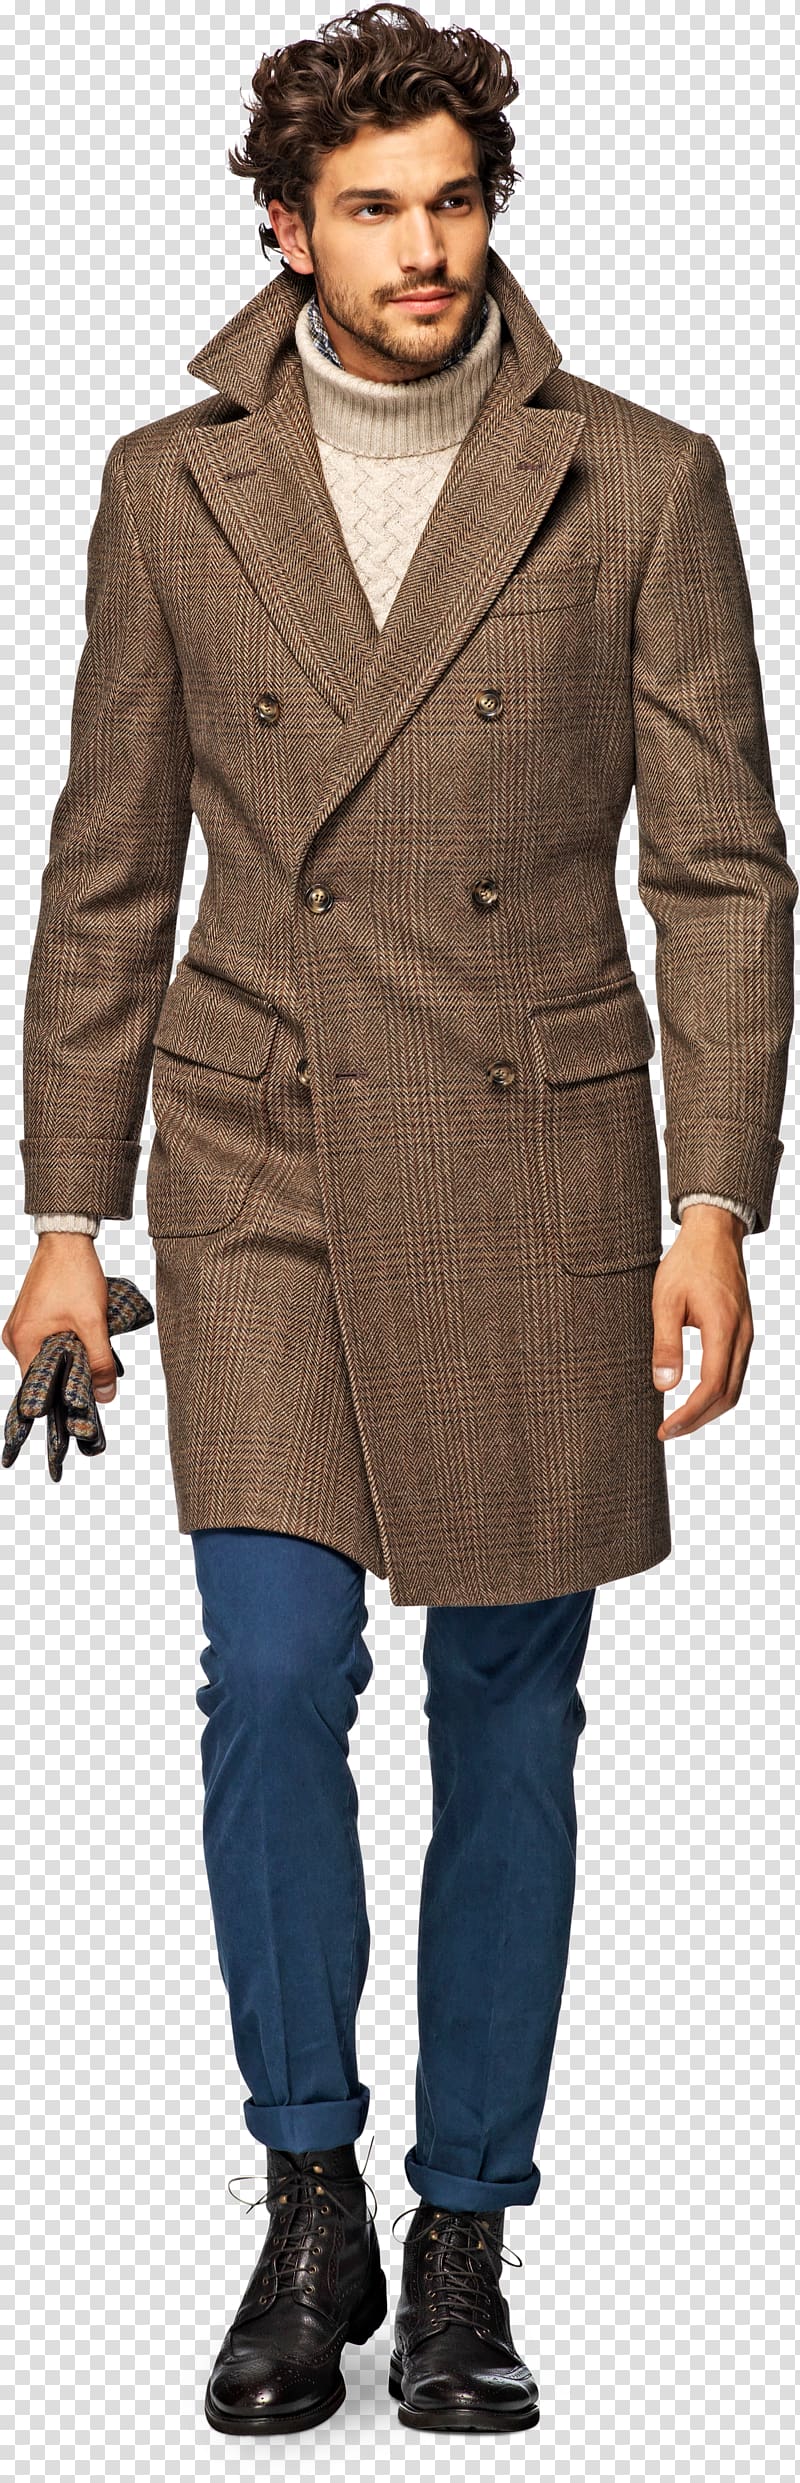 Overcoat Jacket Clothing Suitsupply, suitsupply double breasted ...